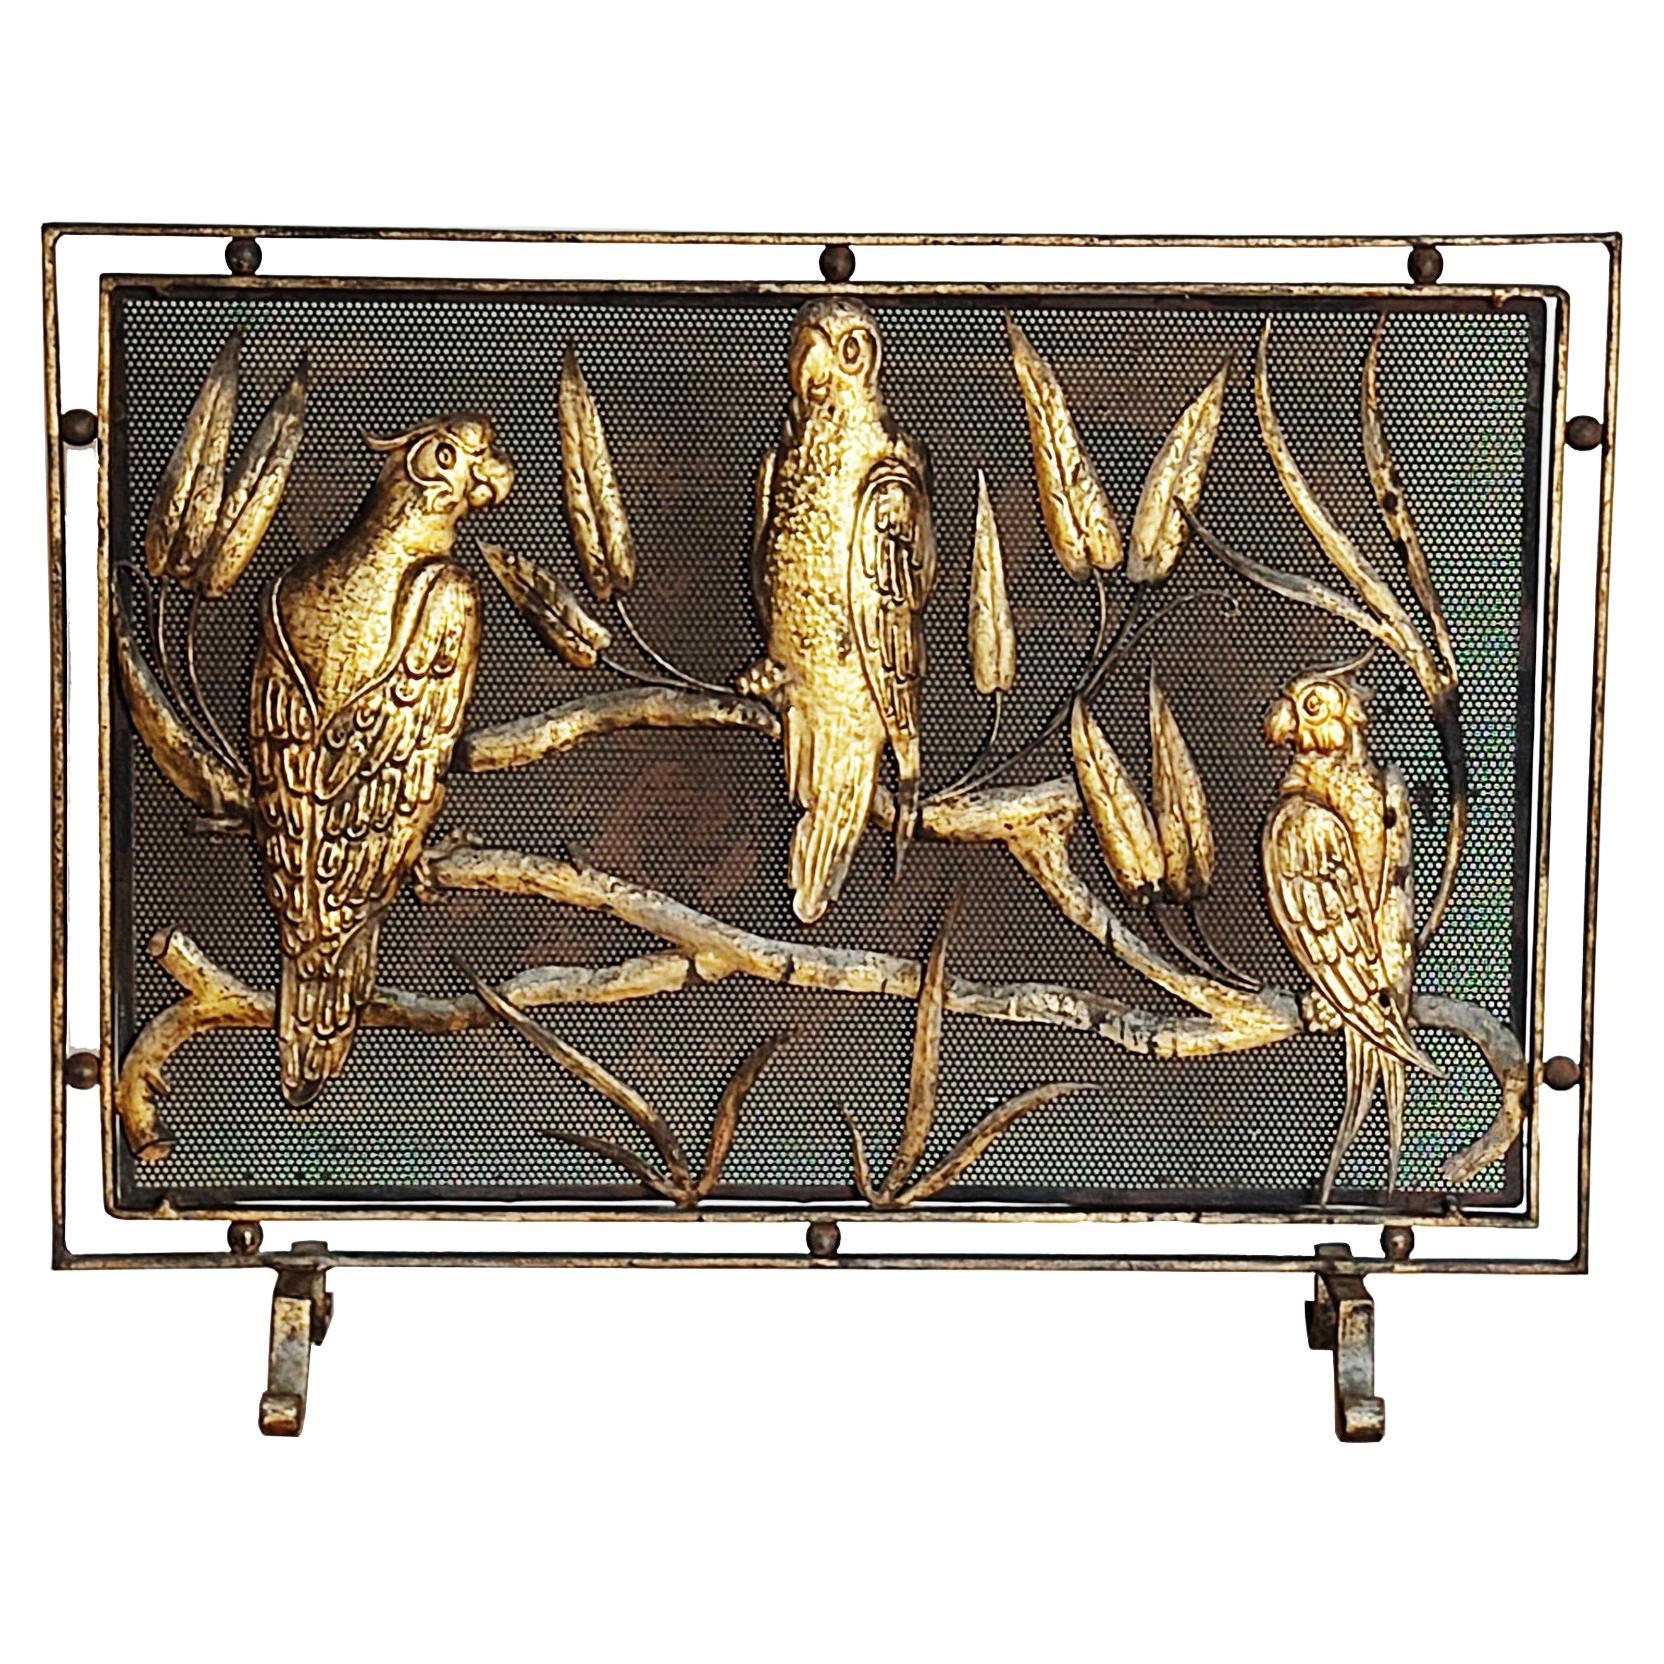 Fire Screen Wrought Iron Whit Parrots The Jungle Handmade 